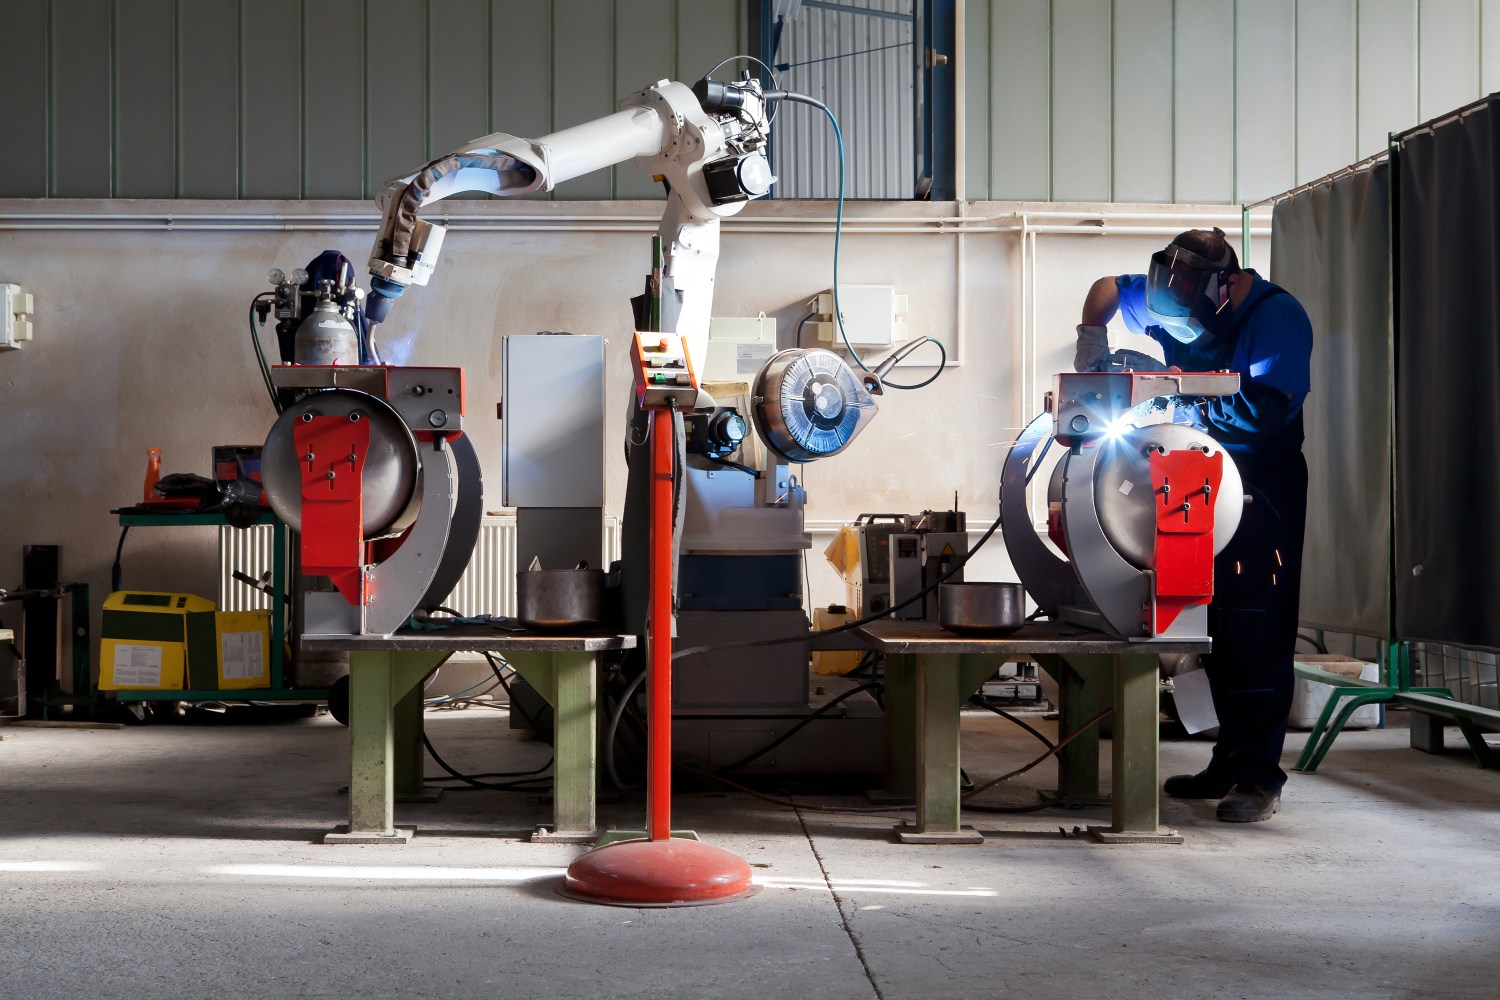 Man and robotic machine work together